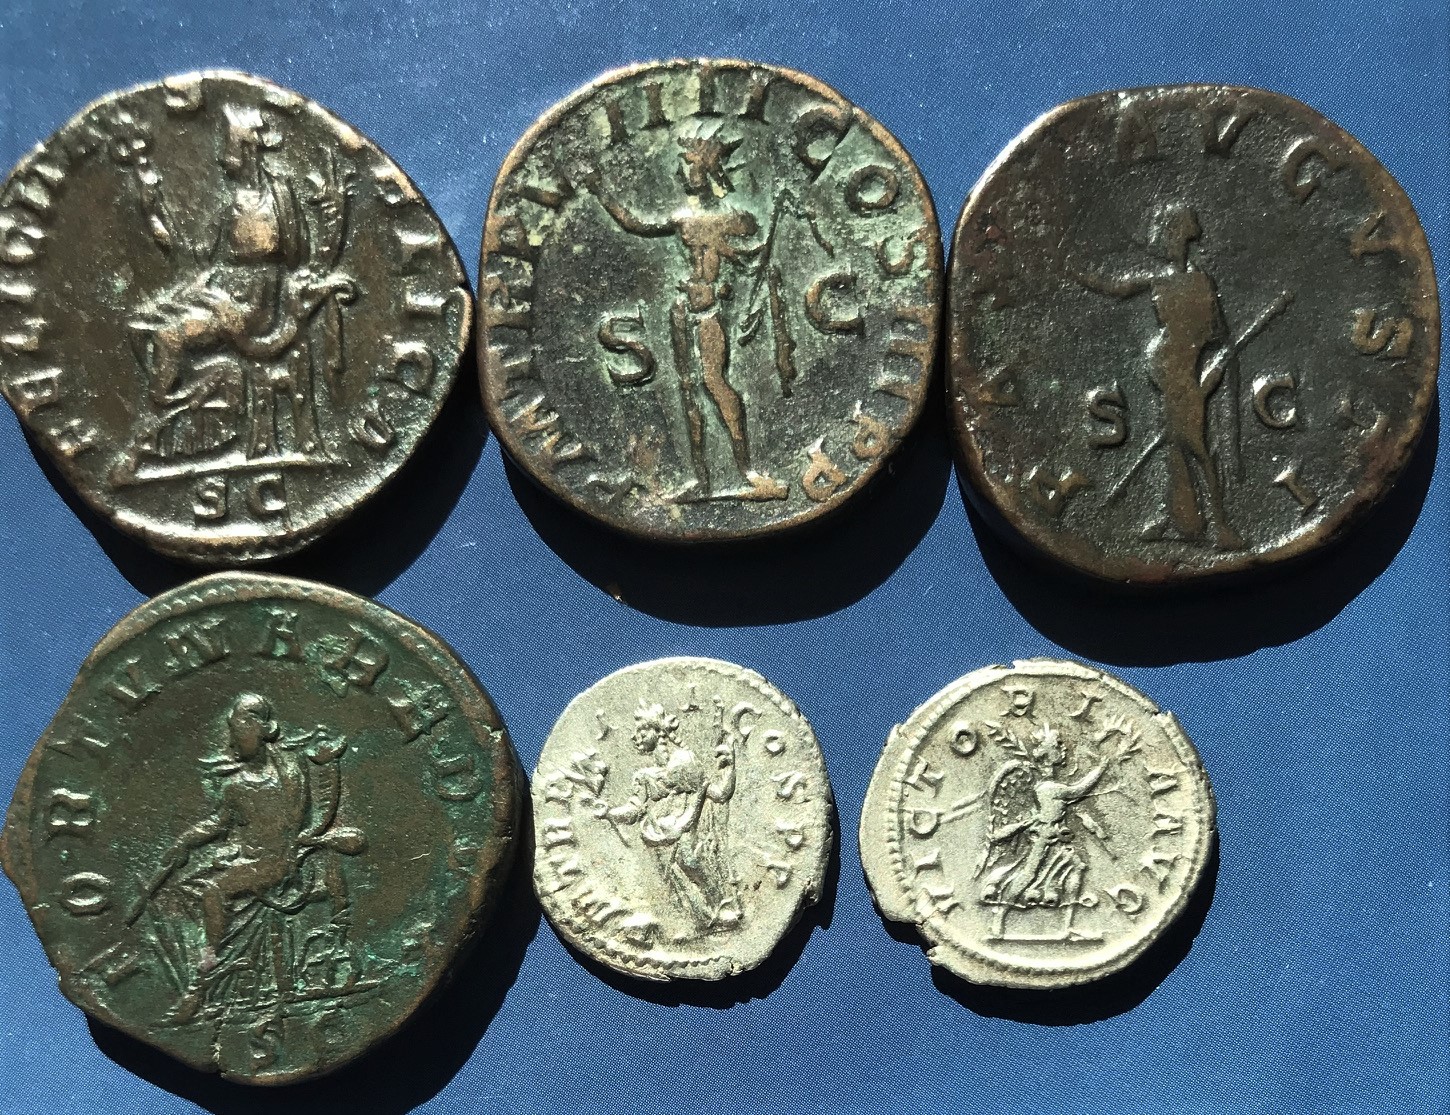 IMG_1965coins of 230's AD.jpg